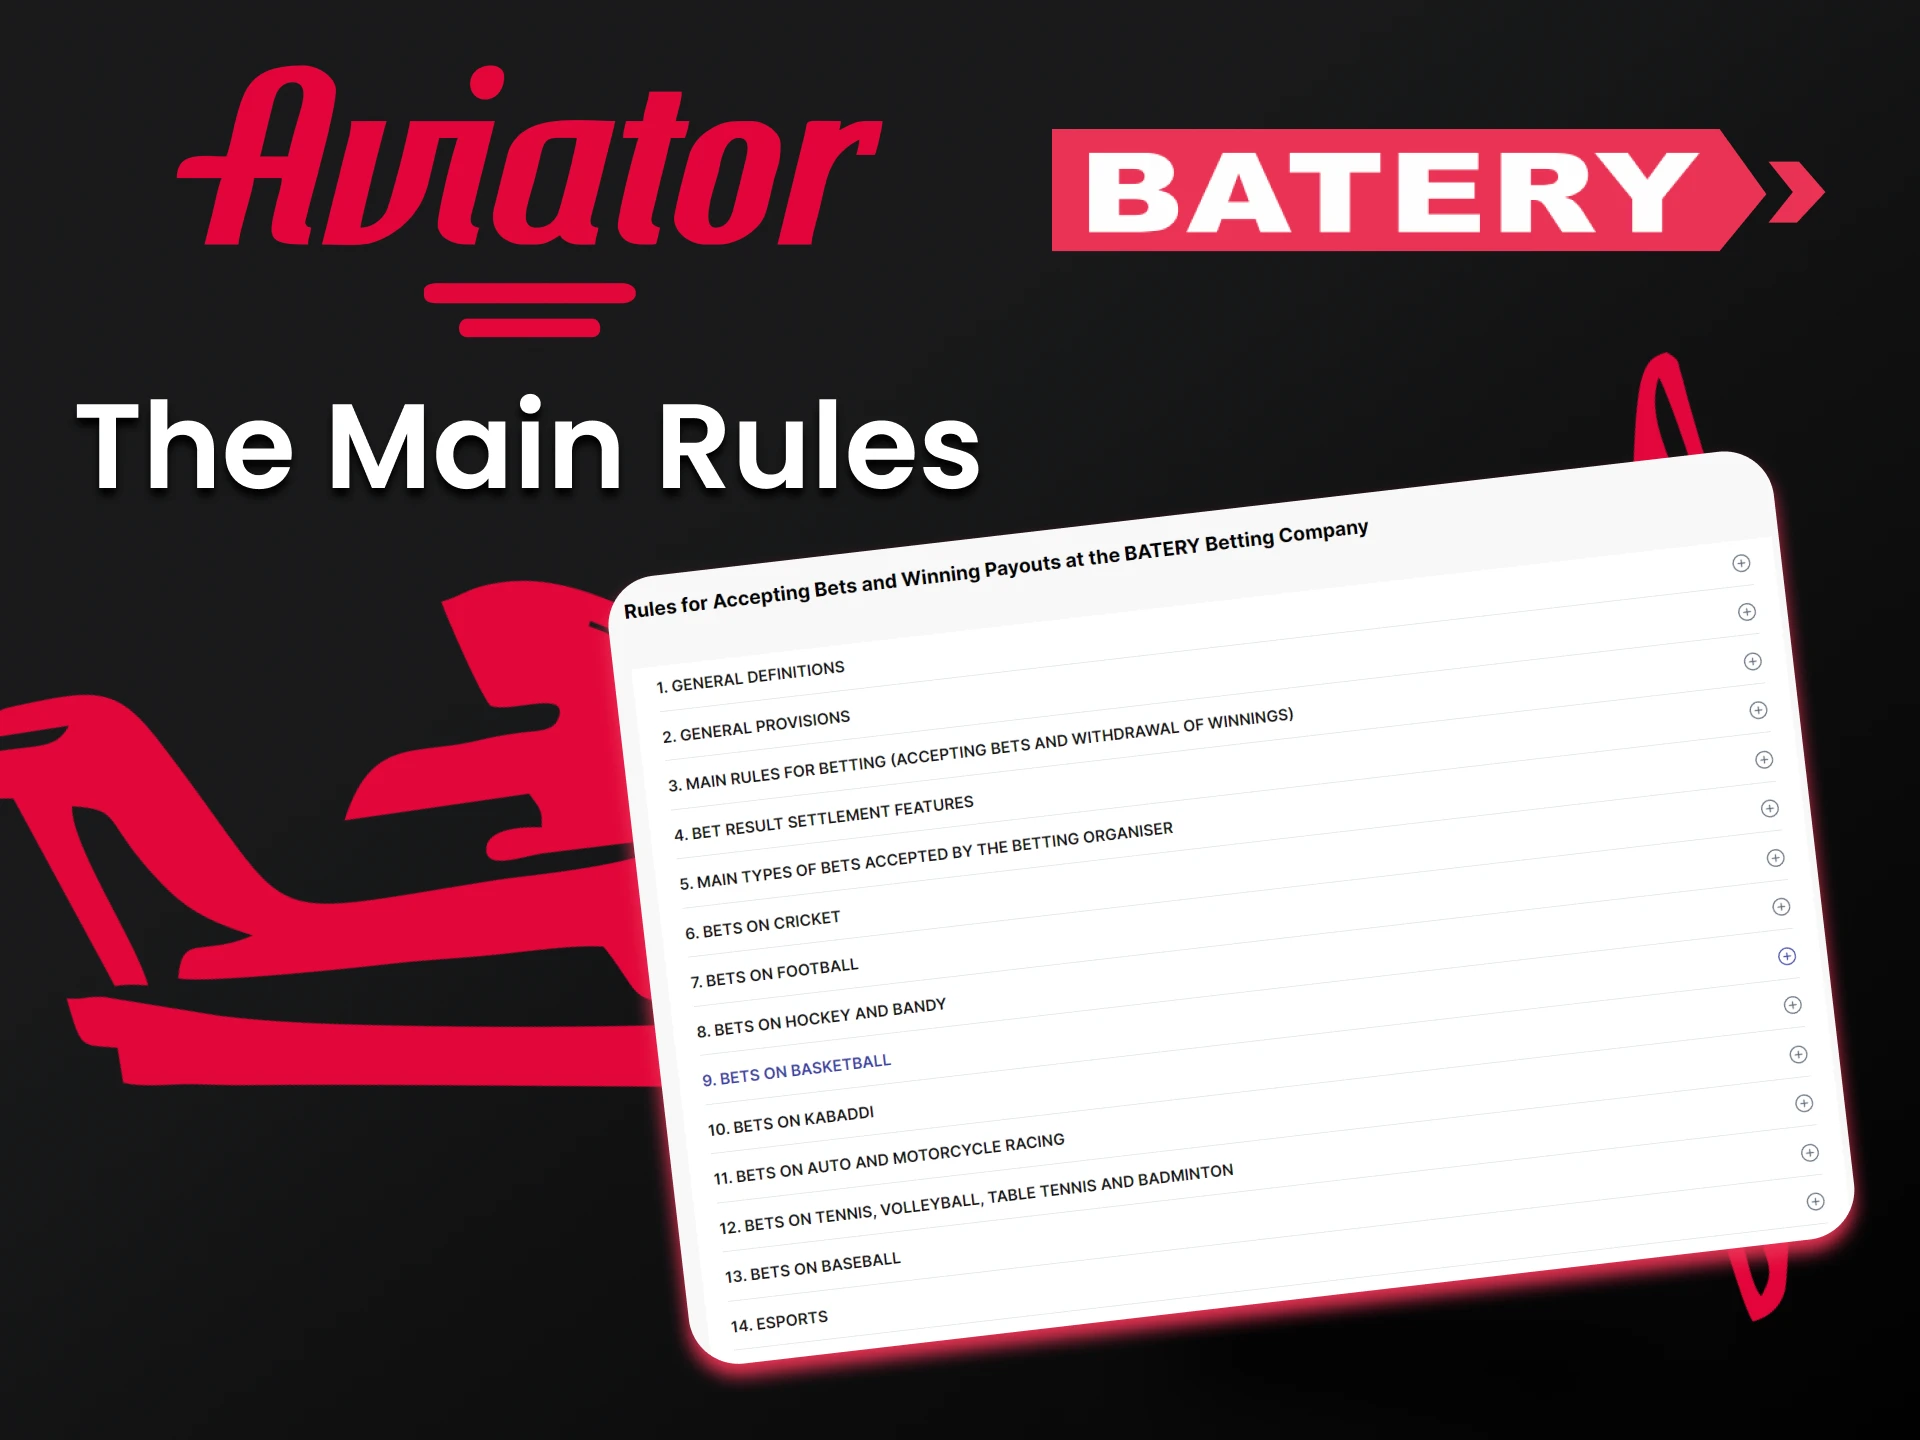 Learn the rules for using the Batery service to play Aviator.